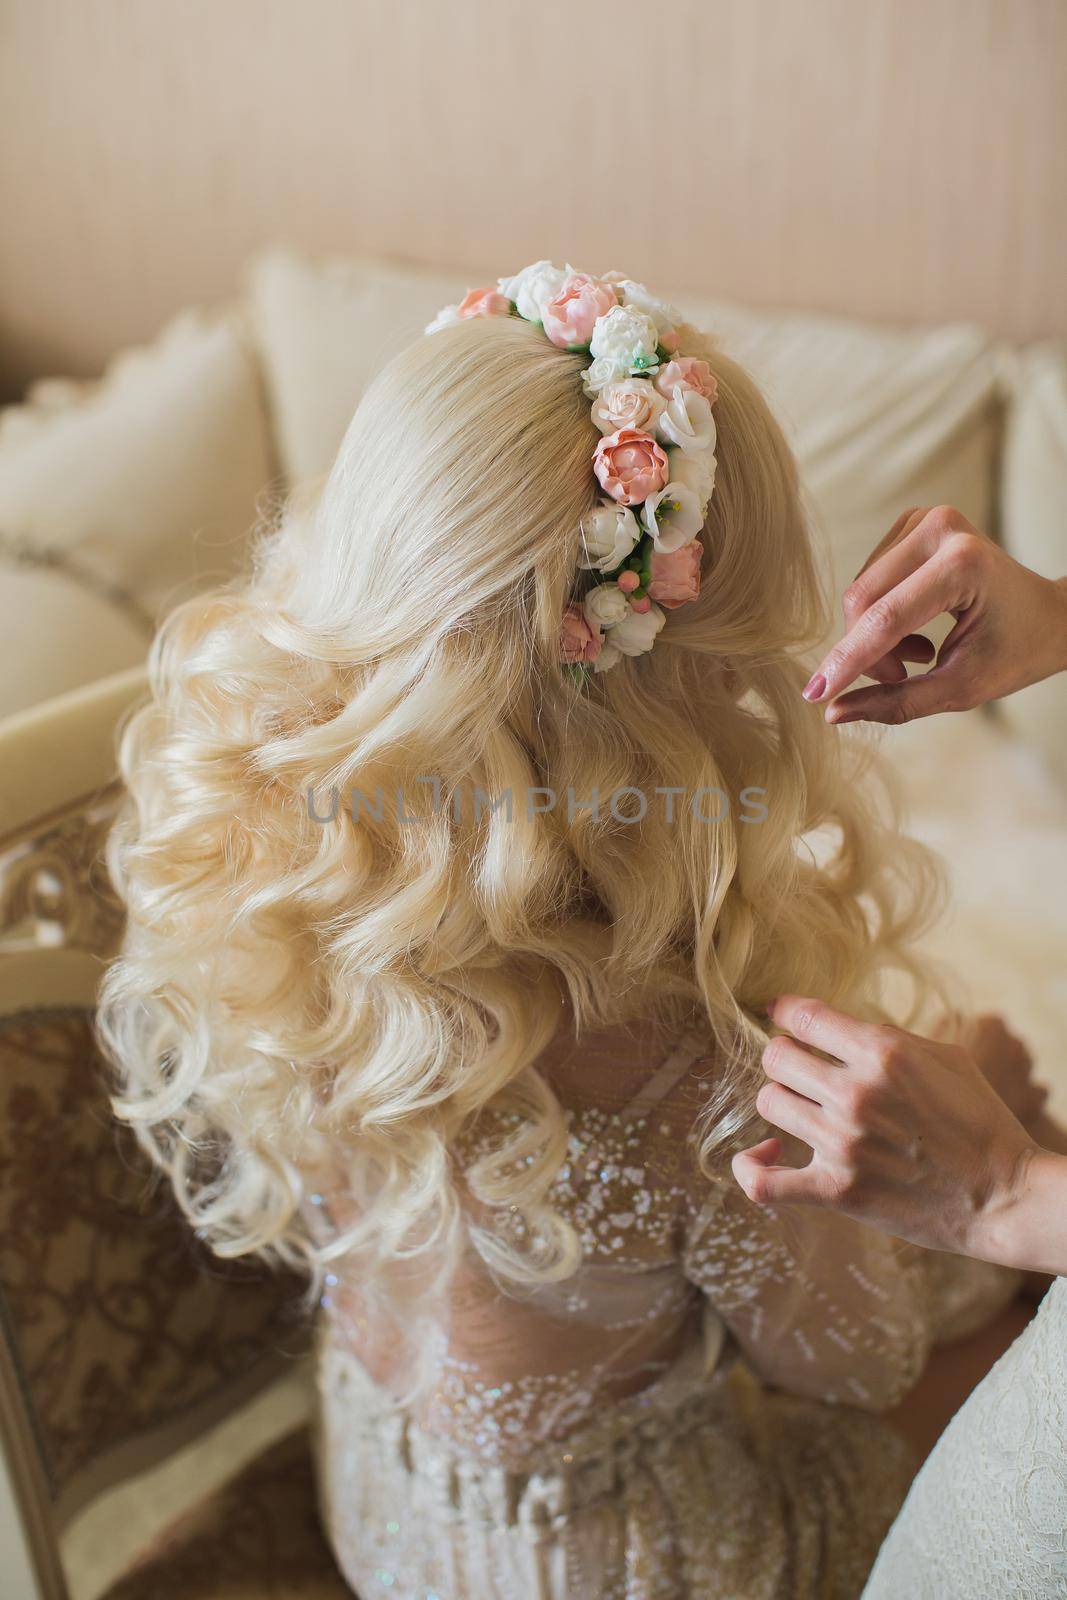 Bride's fees in the morning on the wedding day. Beautiful hairstyle and headband made of fresh flowers by StudioPeace